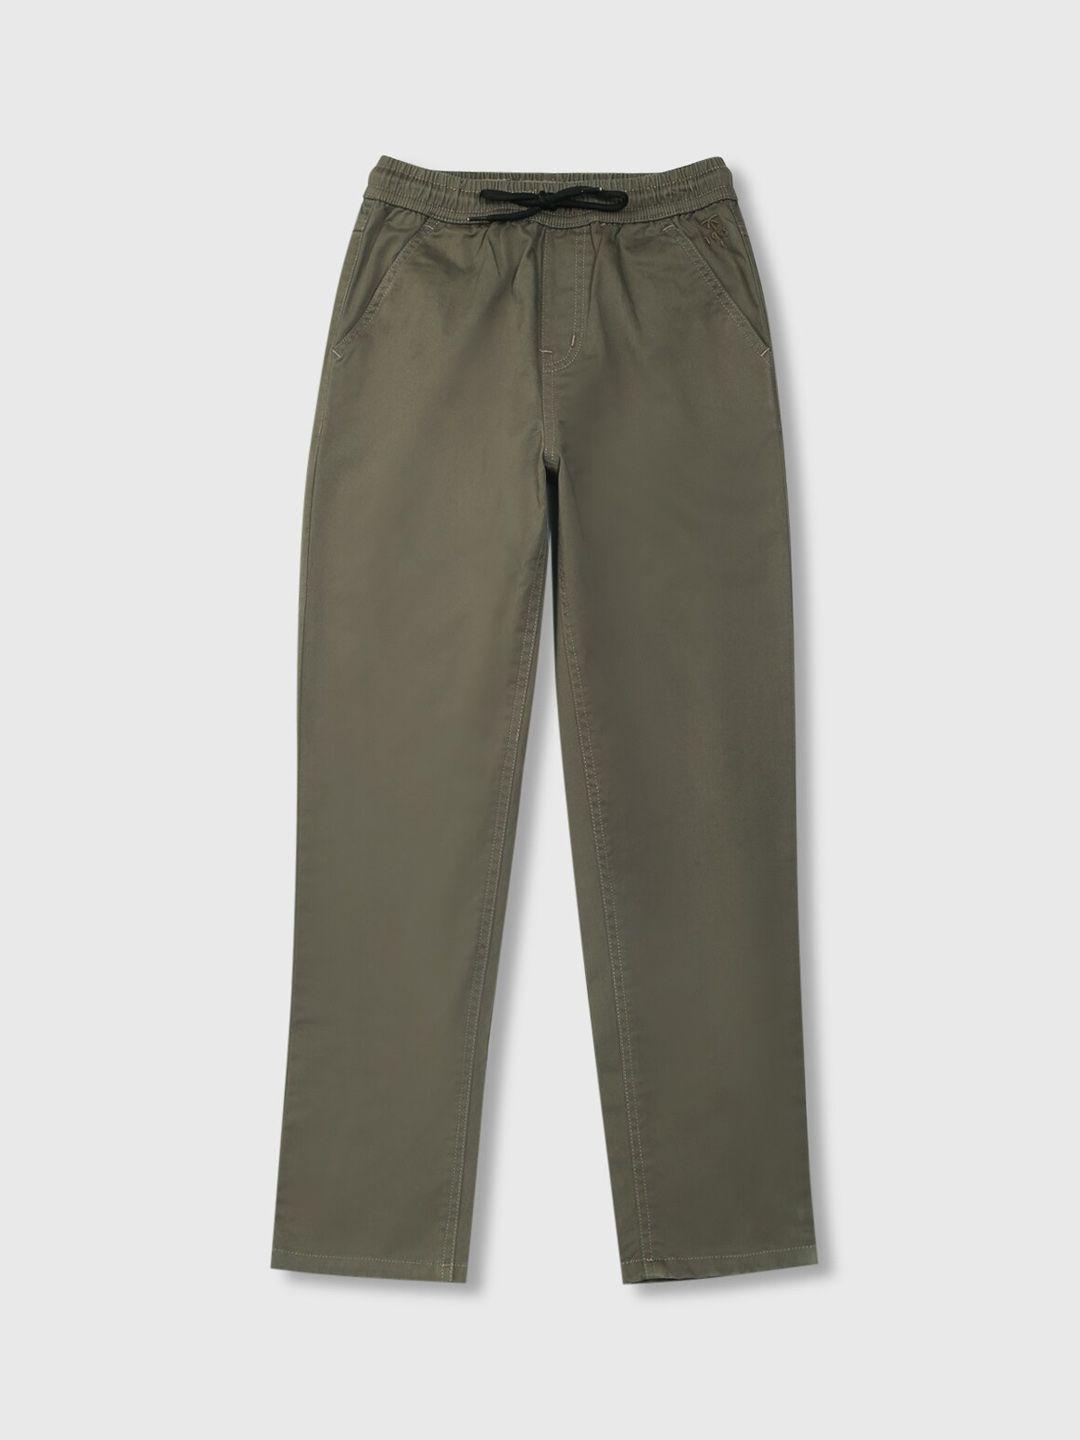 palm tree boys olive green solid joggers trousers